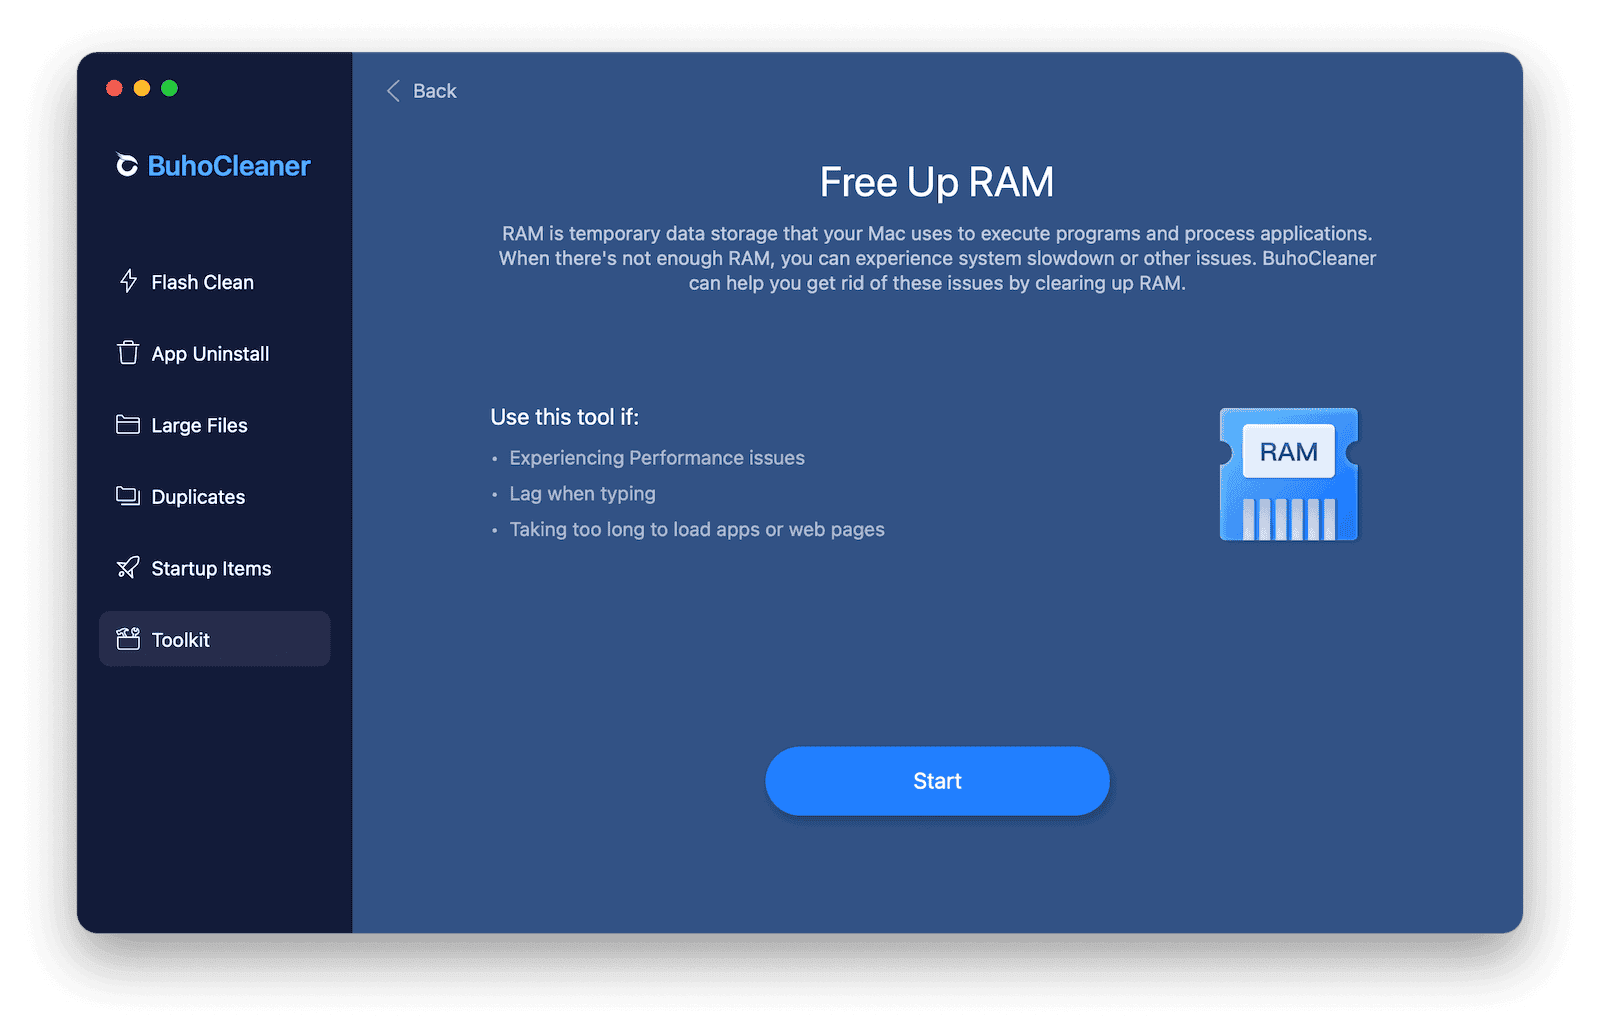 Quickly Free Up RAM on Mac with BuhoCleaner